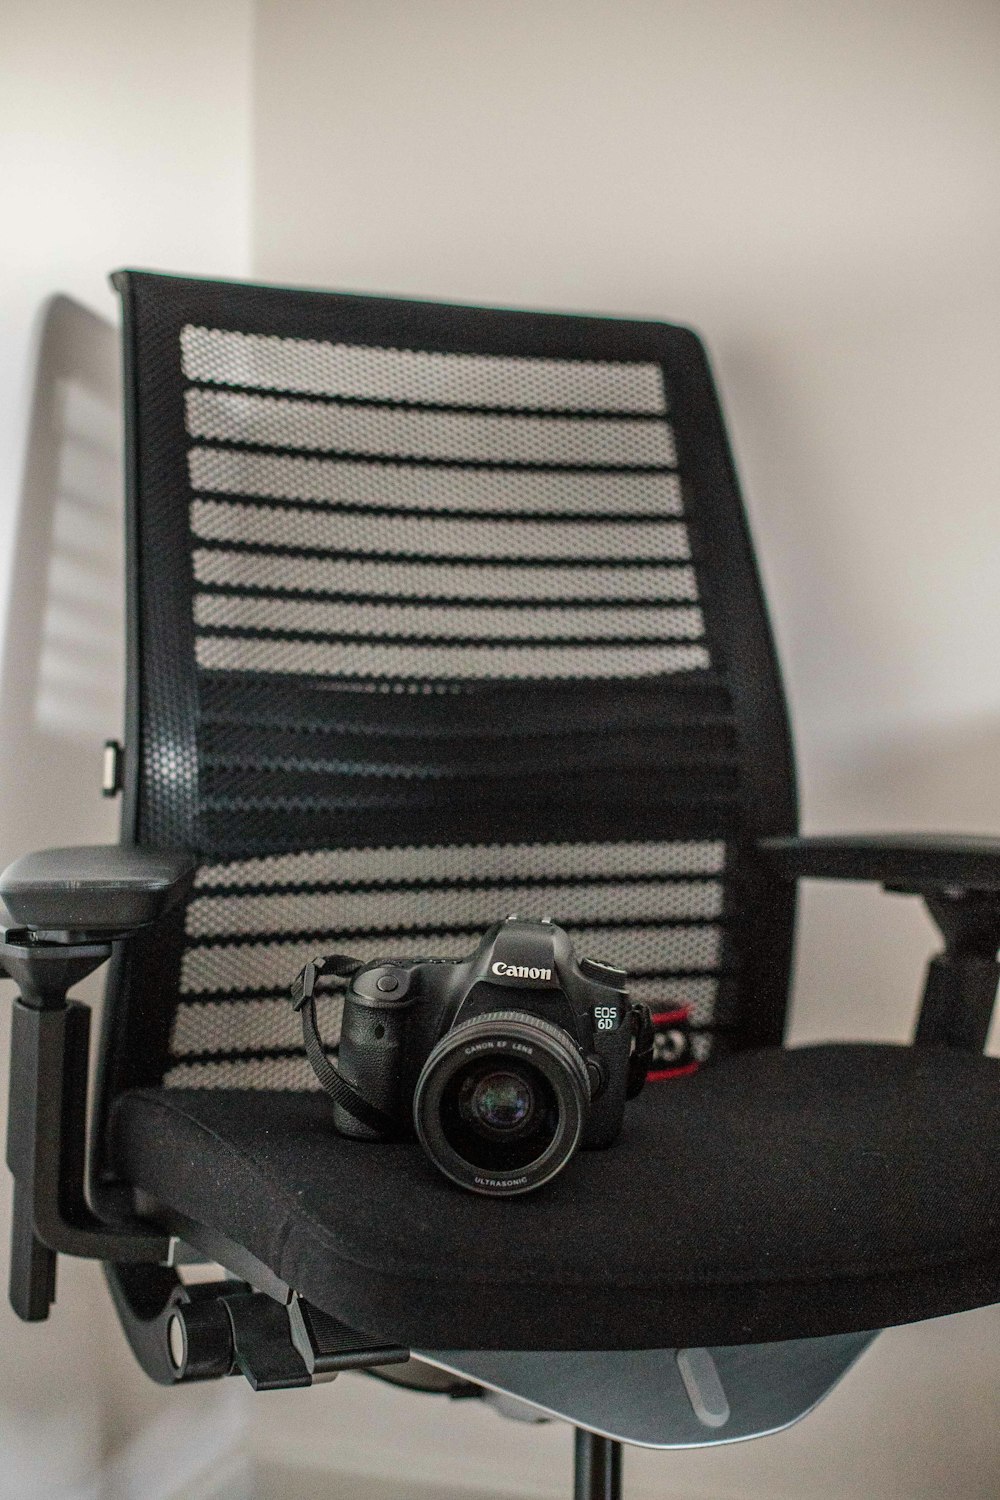 black Canon camera on rolling chair